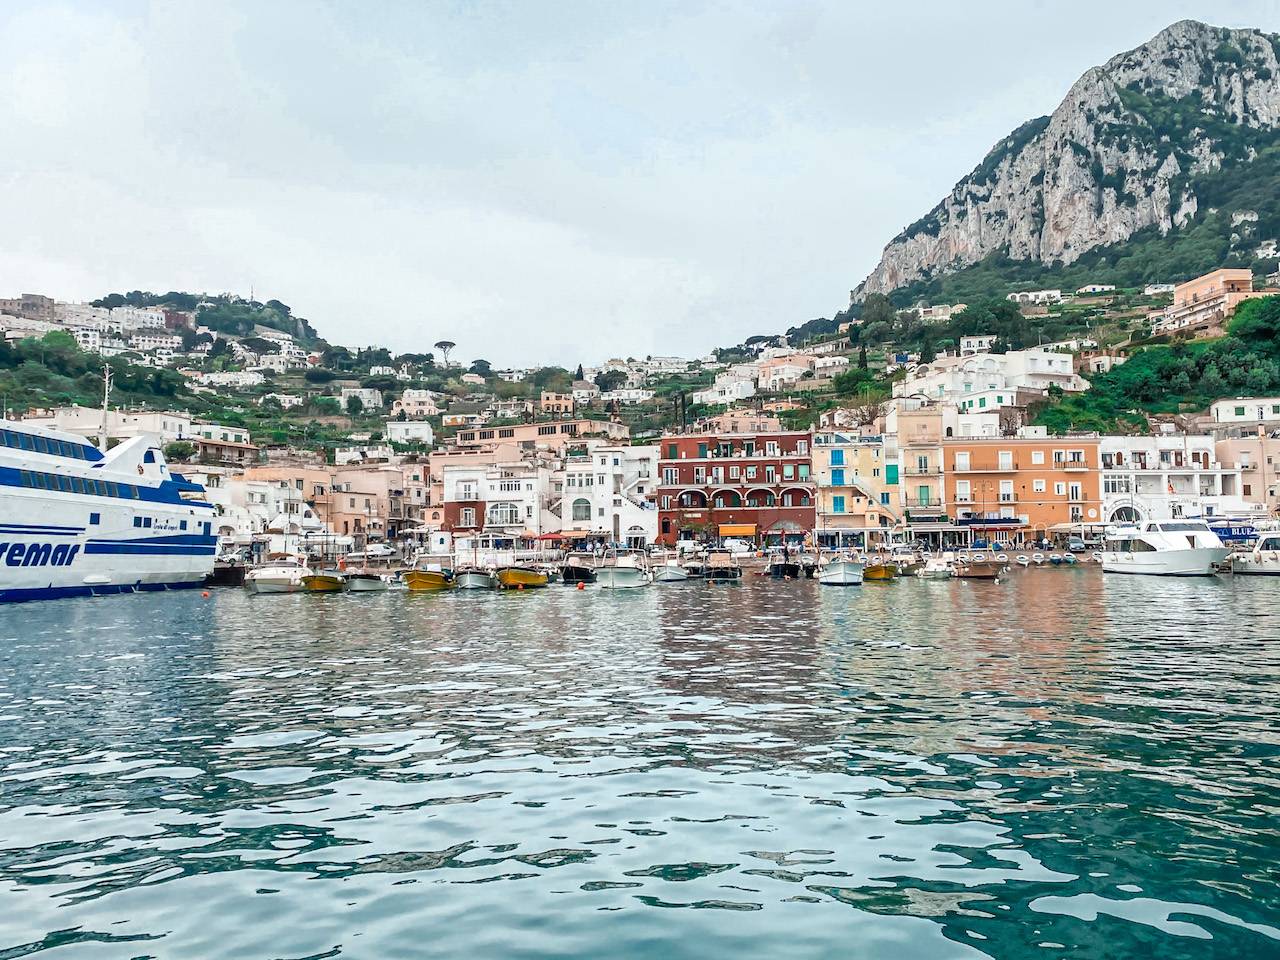 View of Capri from boat